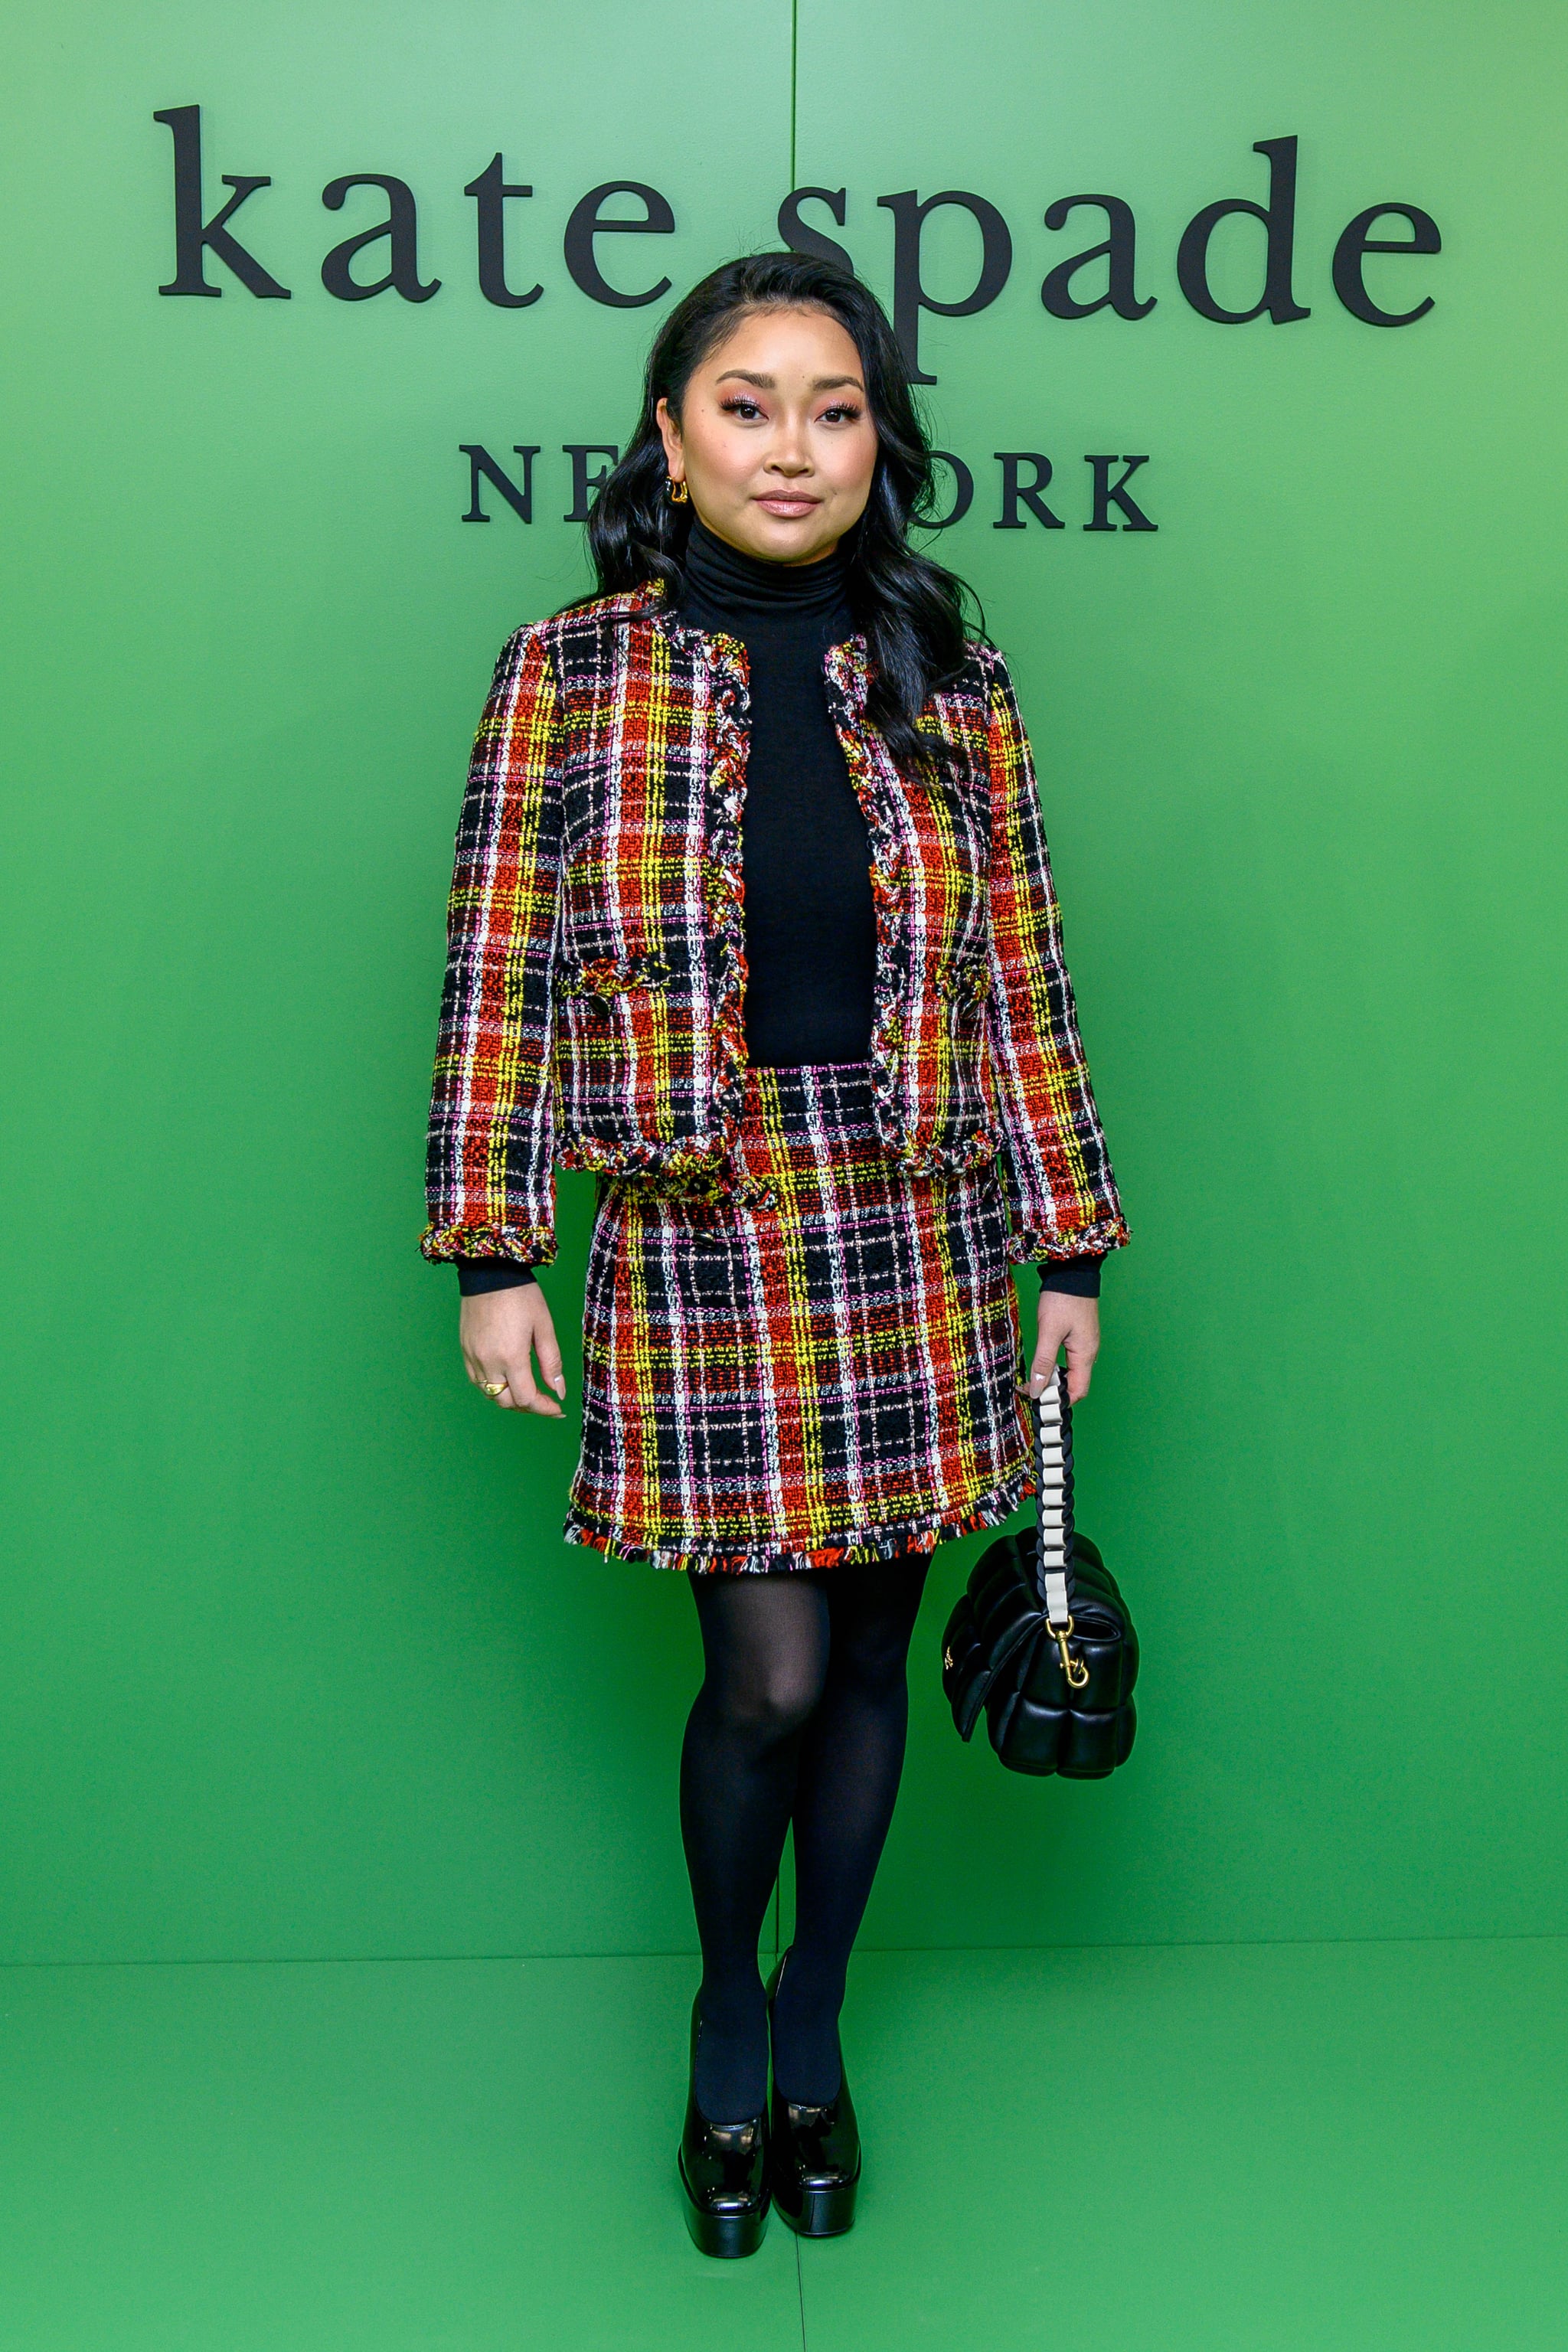 Lana Condor at the Kate Spade New York Presentation | See Every Celebrity  Front-Row Appearance at Fashion Week | POPSUGAR Fashion Photo 71